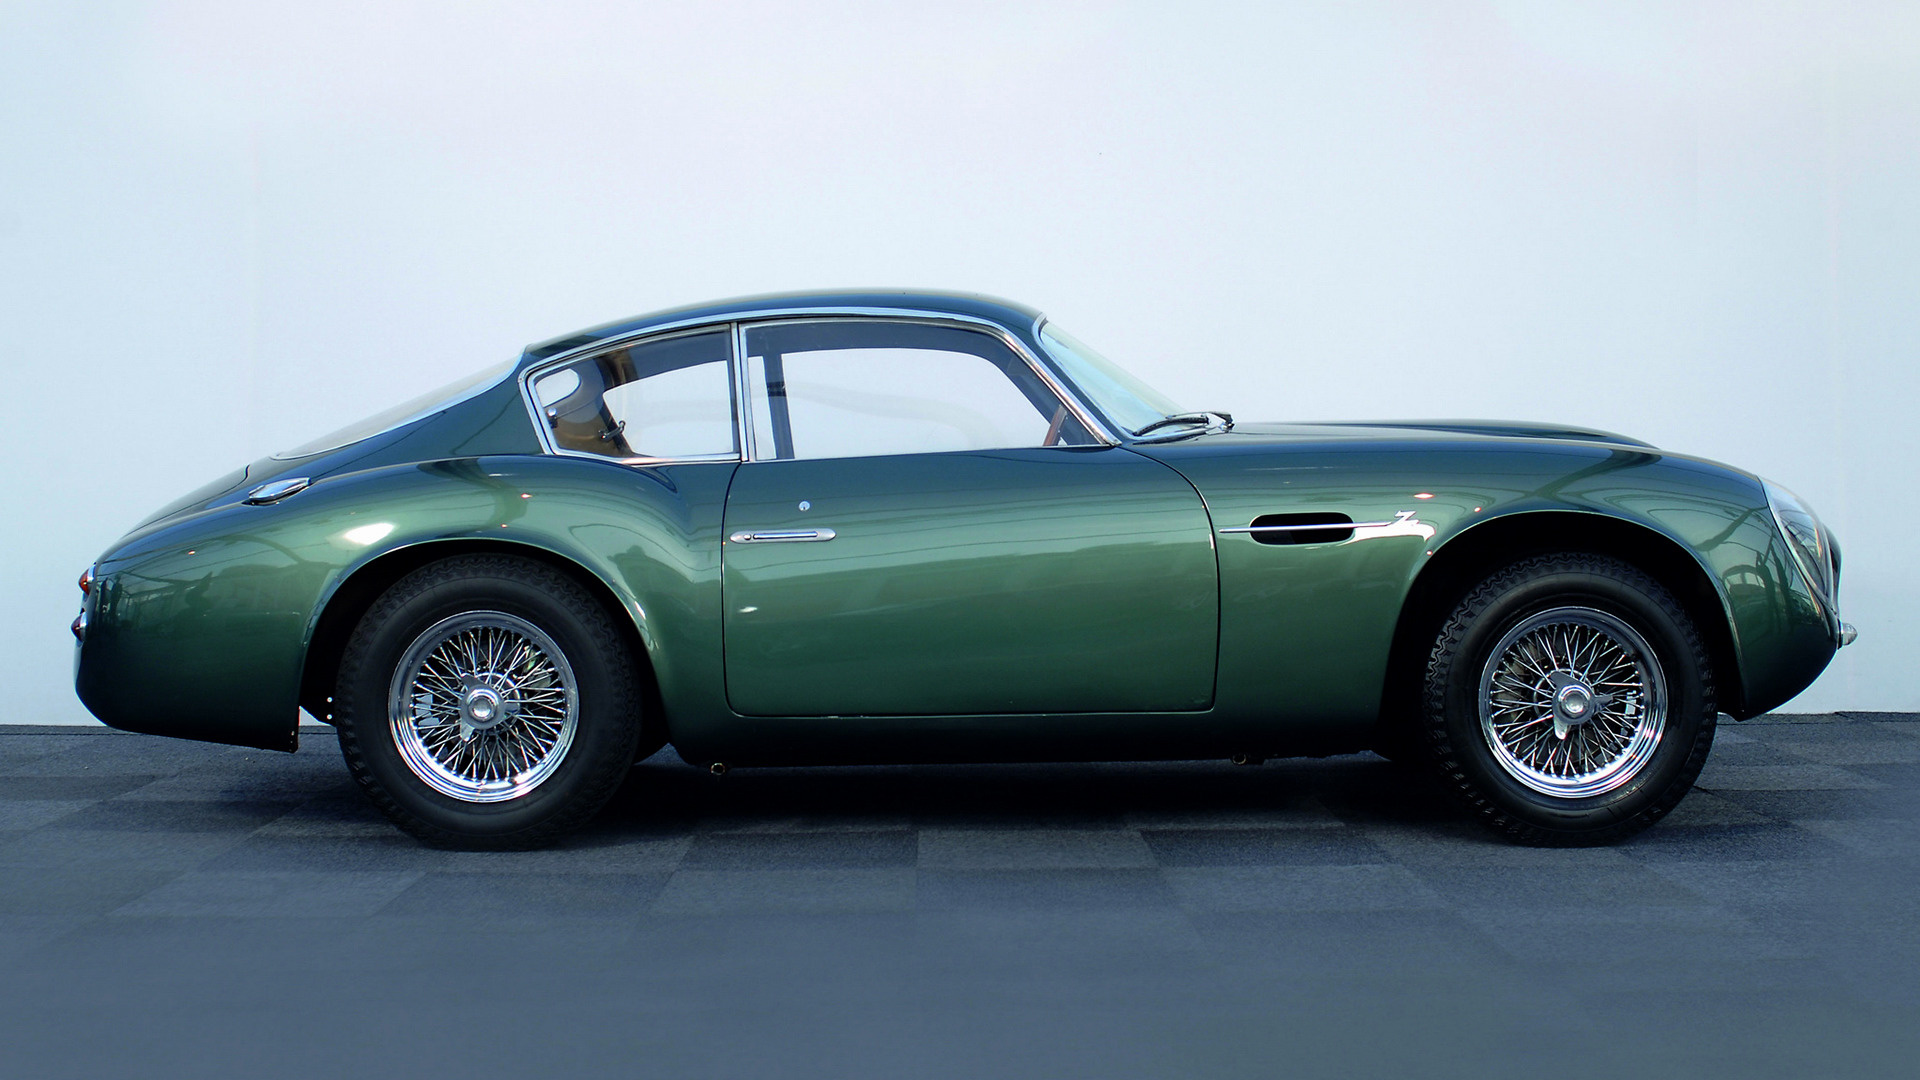 1960 Aston Martin DB4 GT Zagato (UK) - Wallpapers and HD Images | Car Pixel